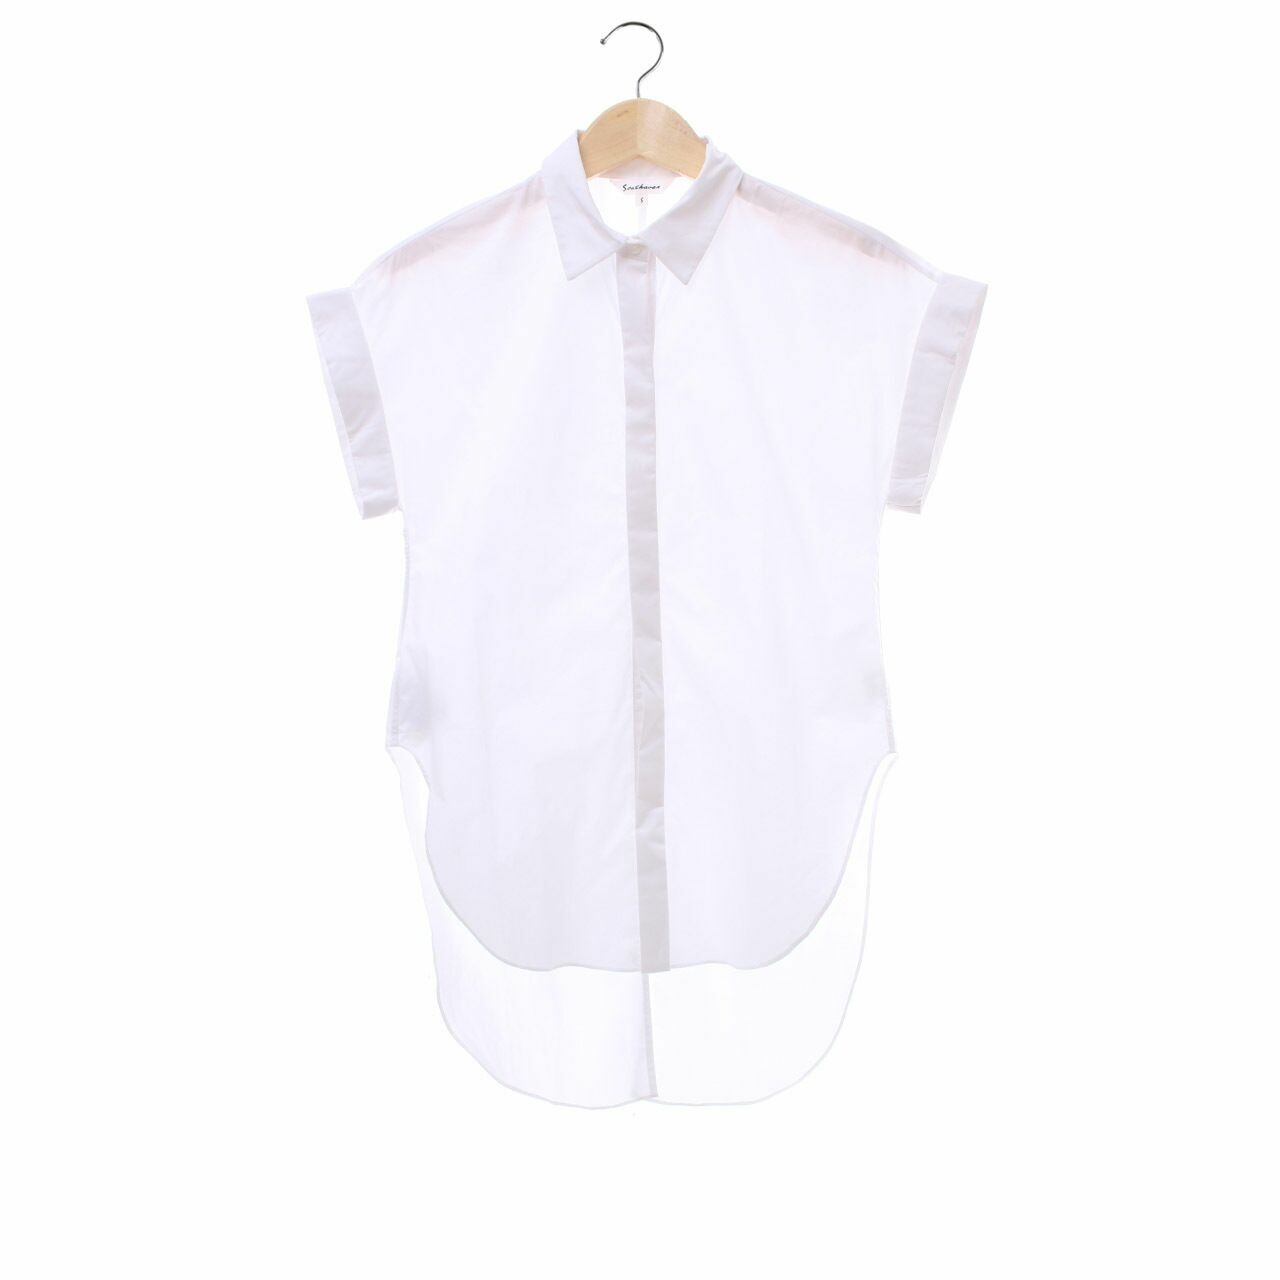 Southaven White Short Sleeve Shirt